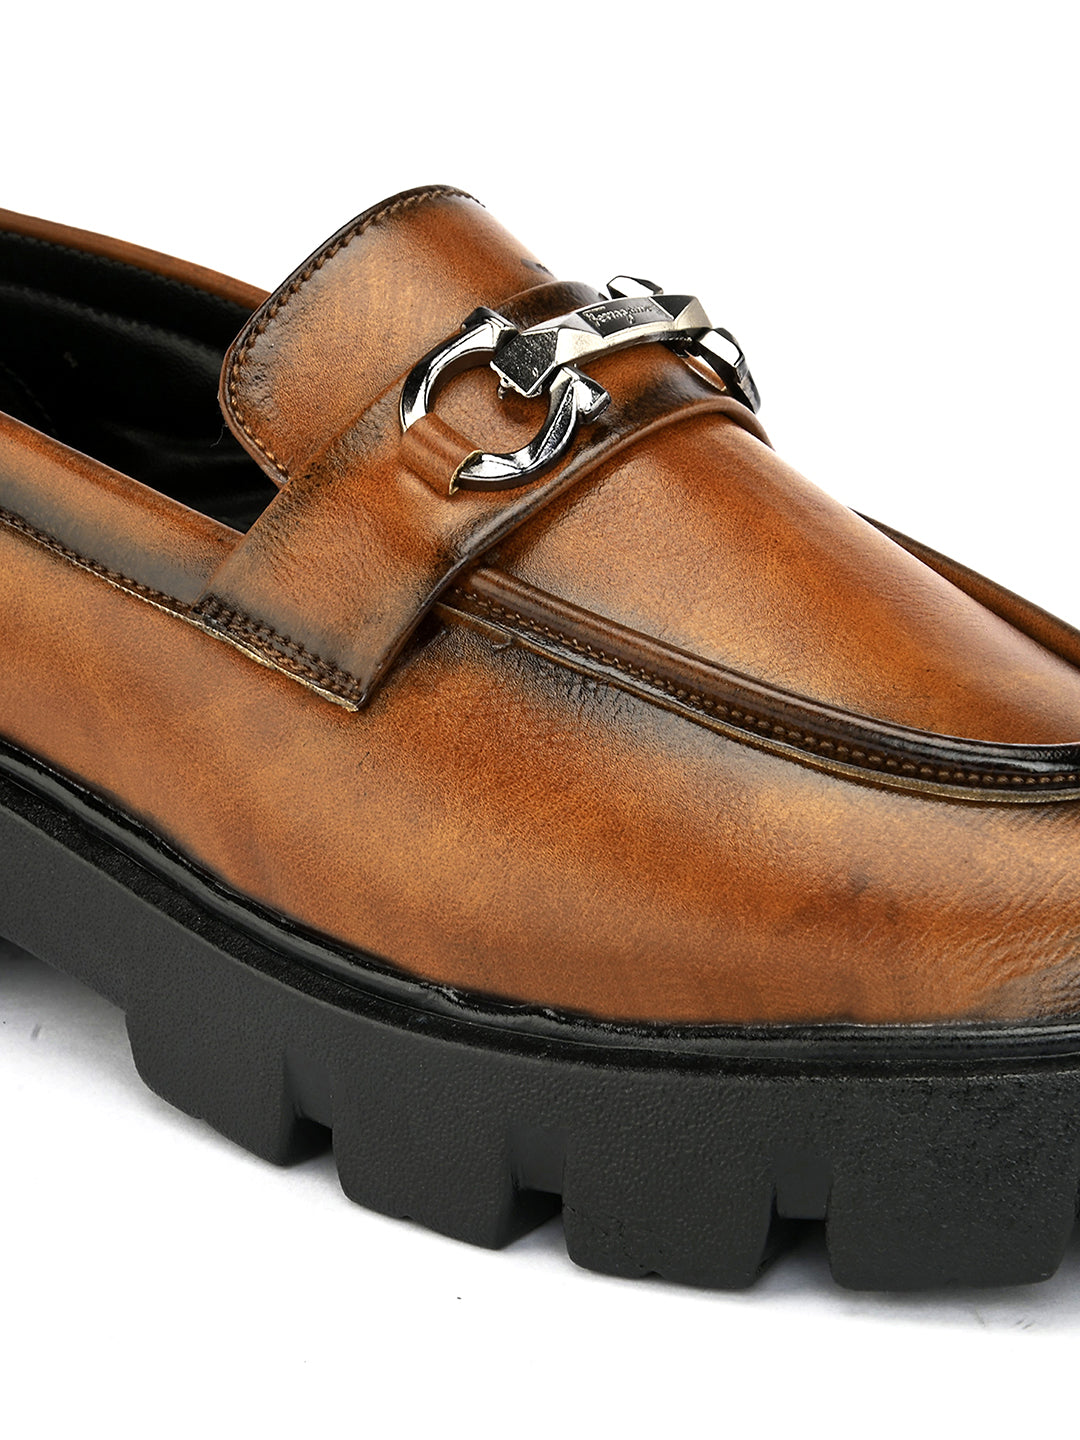 Men's Chunky Casual Formal Loafers. (280-BLK)